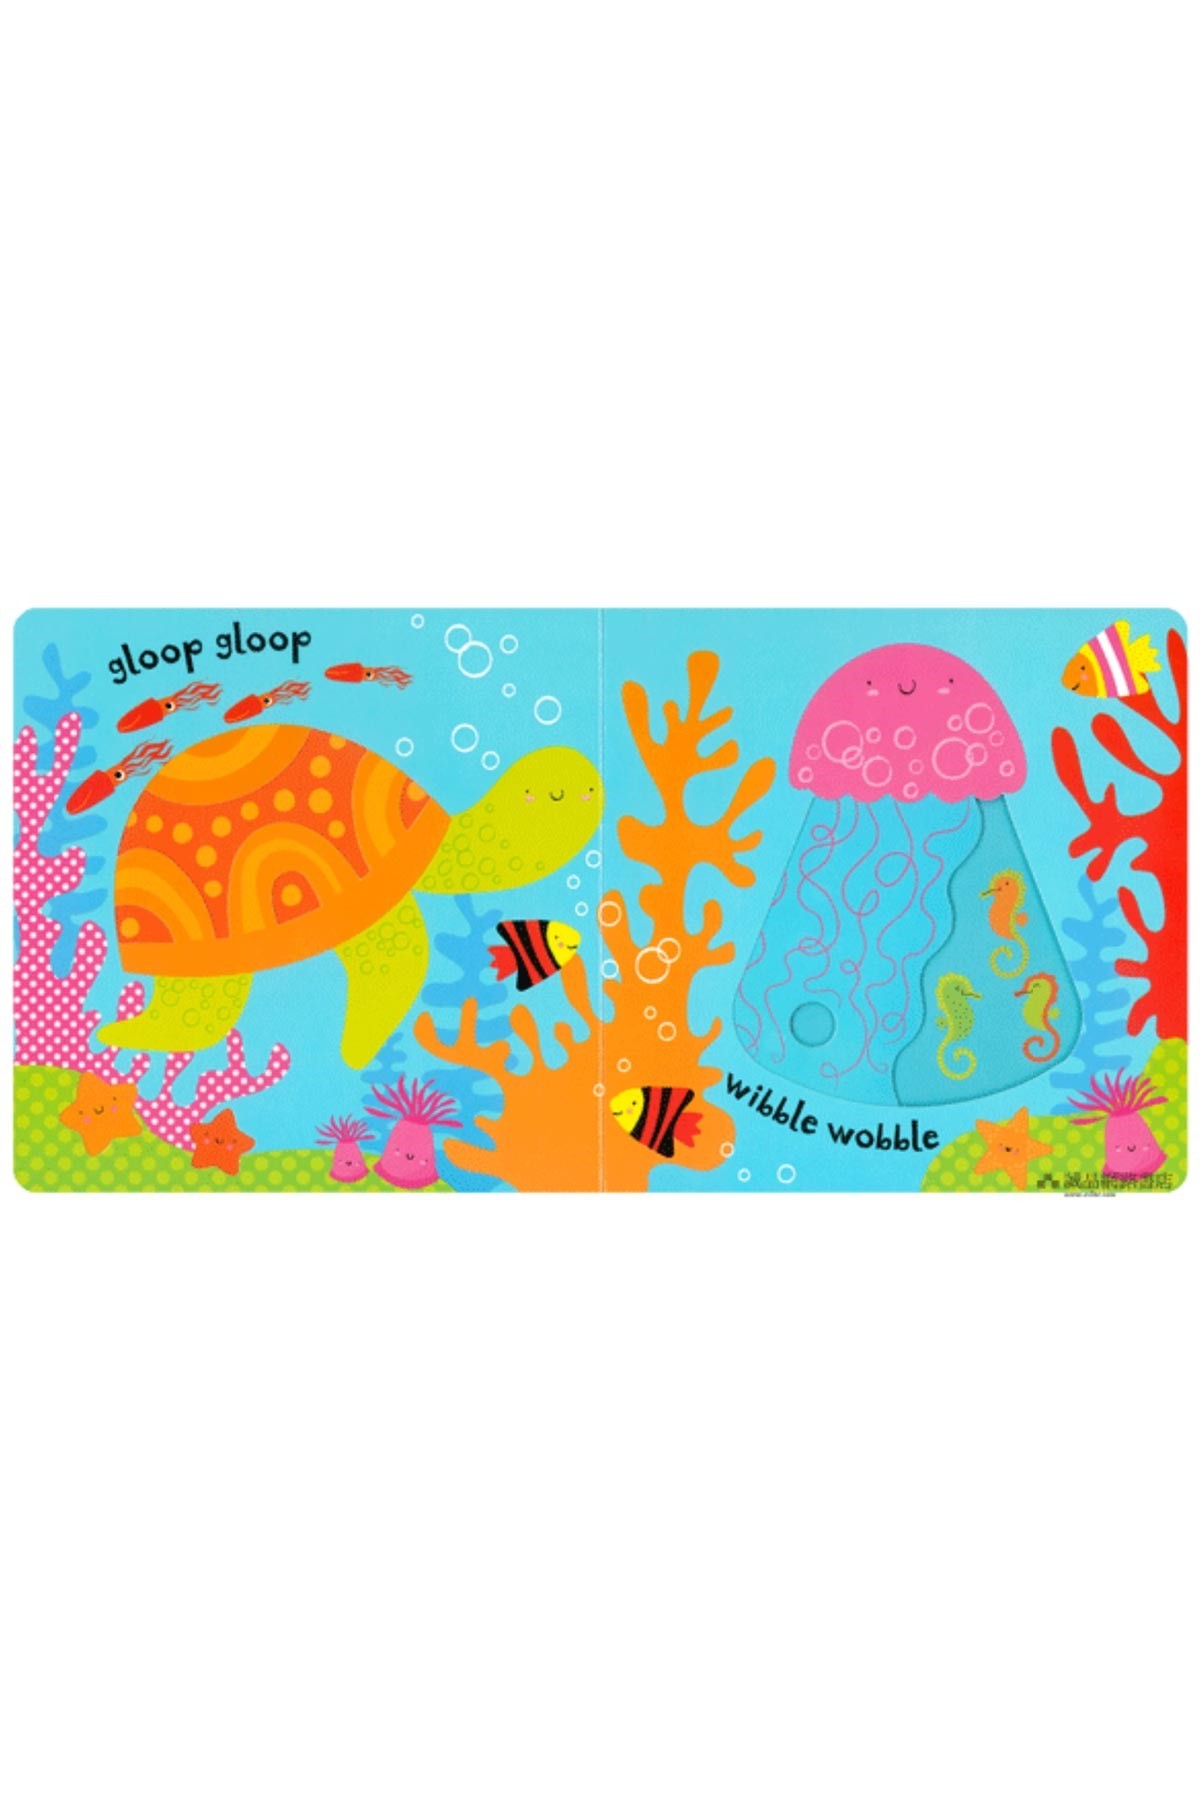 The Usborne BVF Slide & See Under the Sea